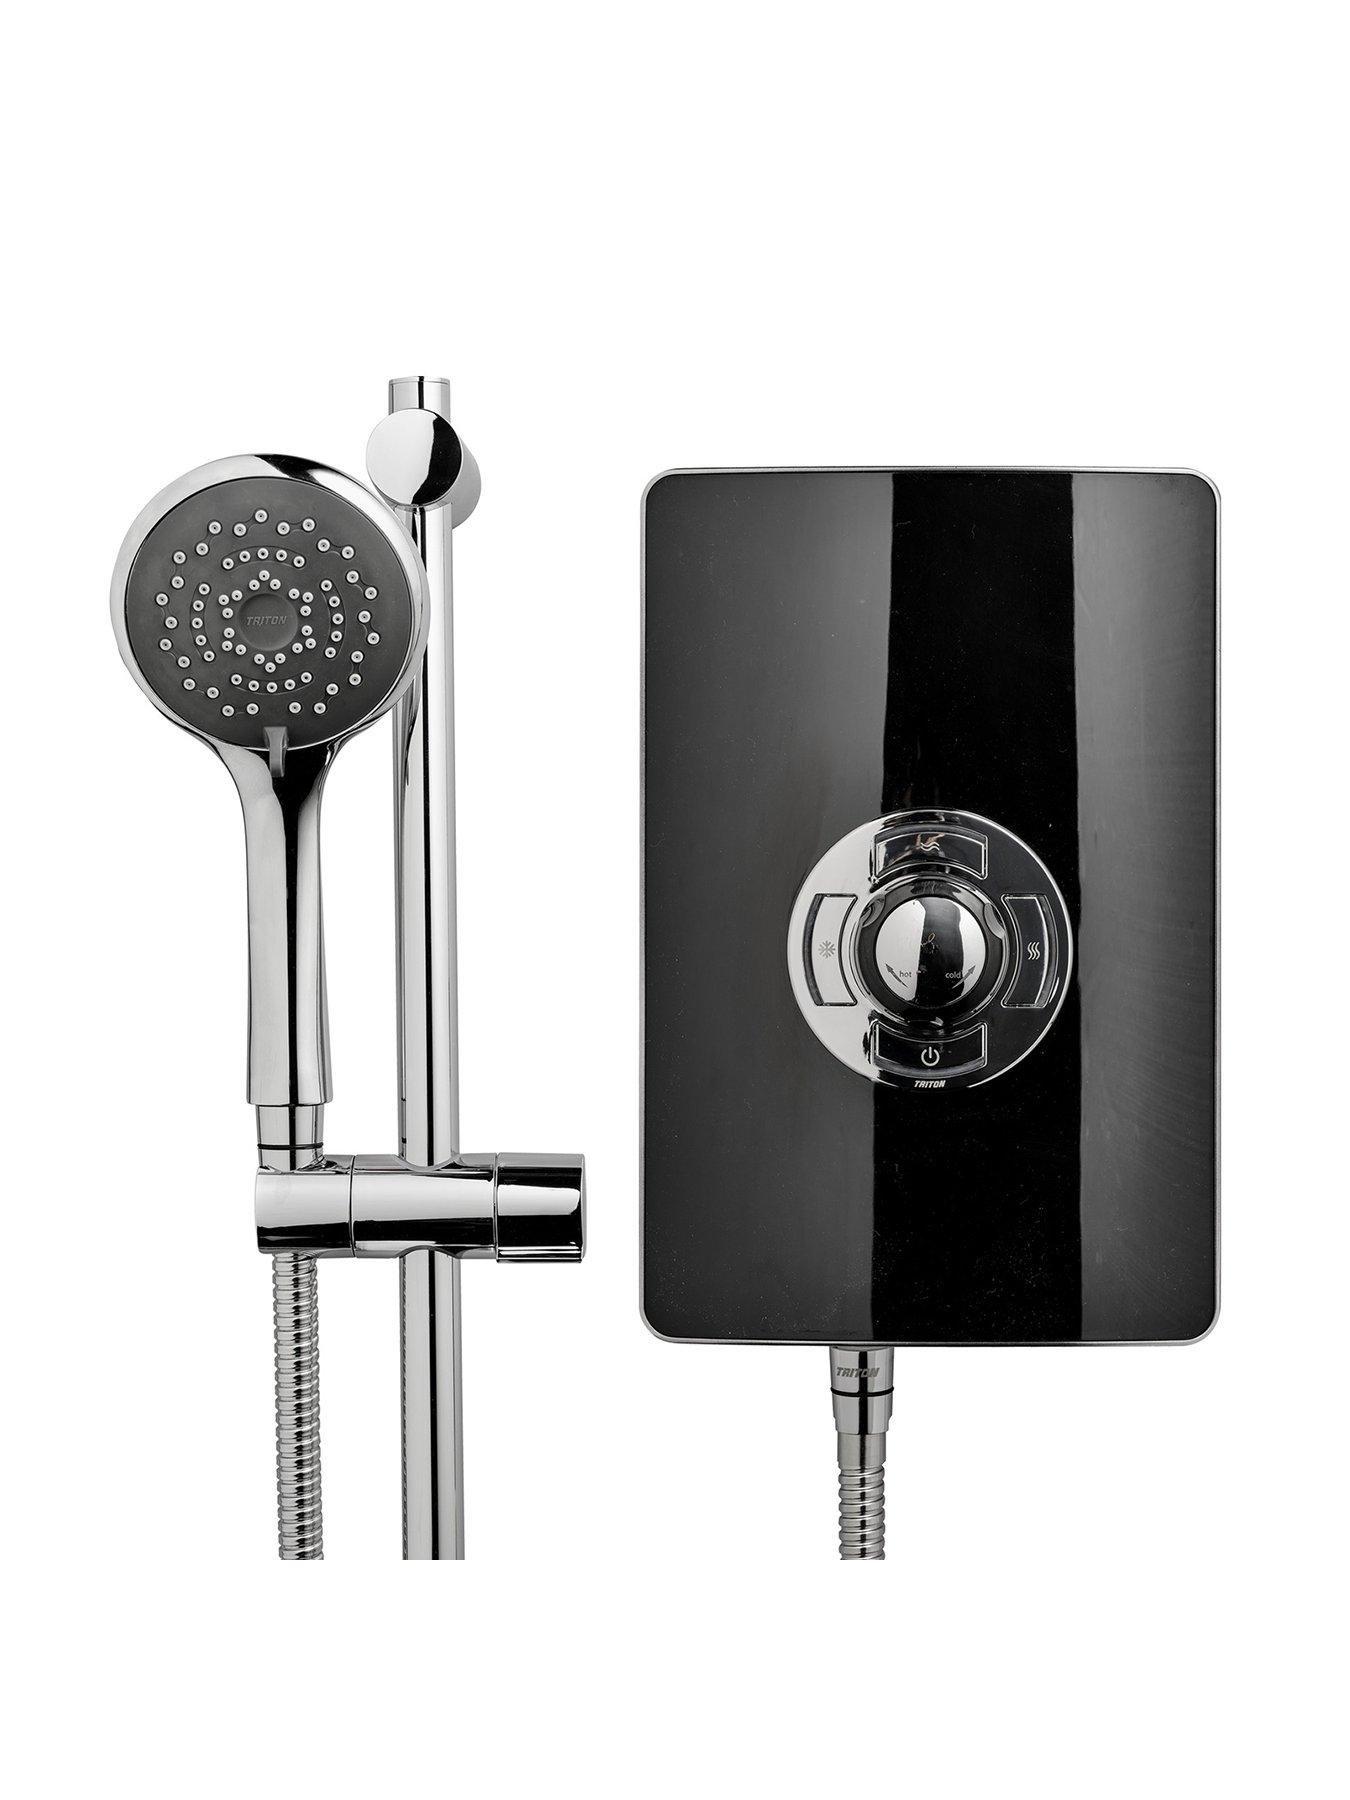 Triton Collection Ii 9.5Kw Electric Shower - Black Gloss